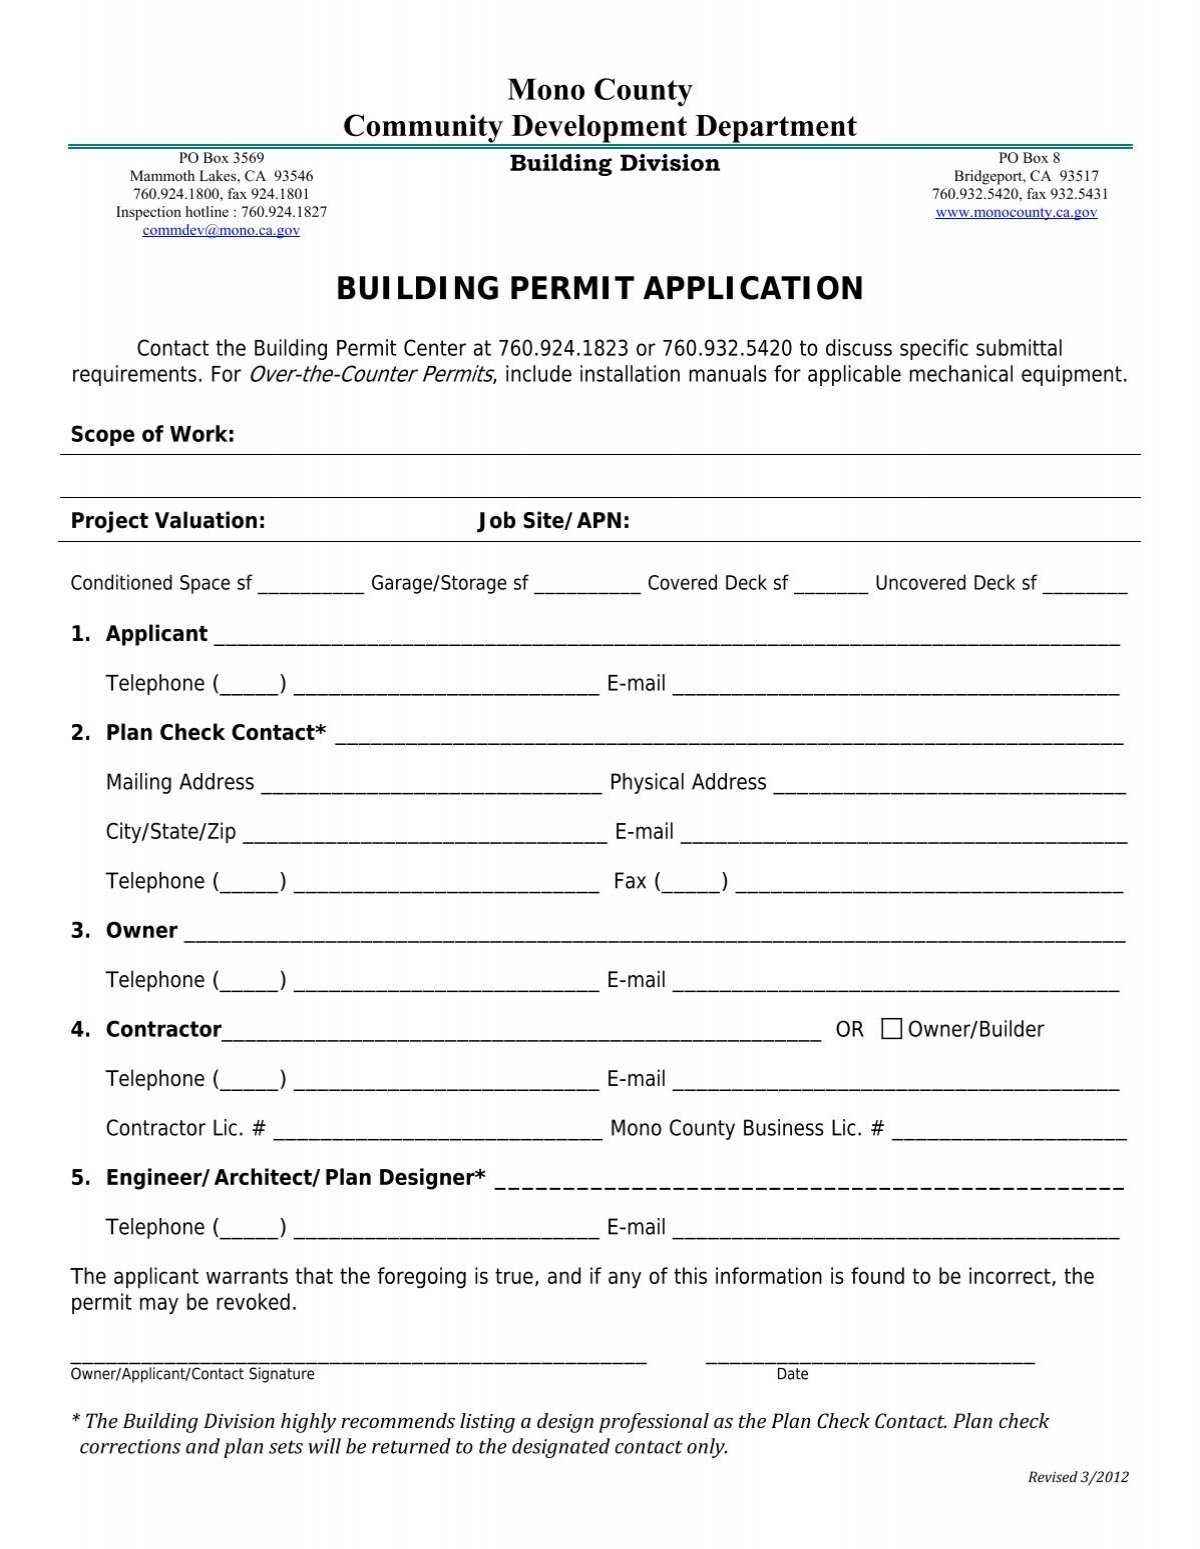 Building Permit Applications - Mono County - State of California